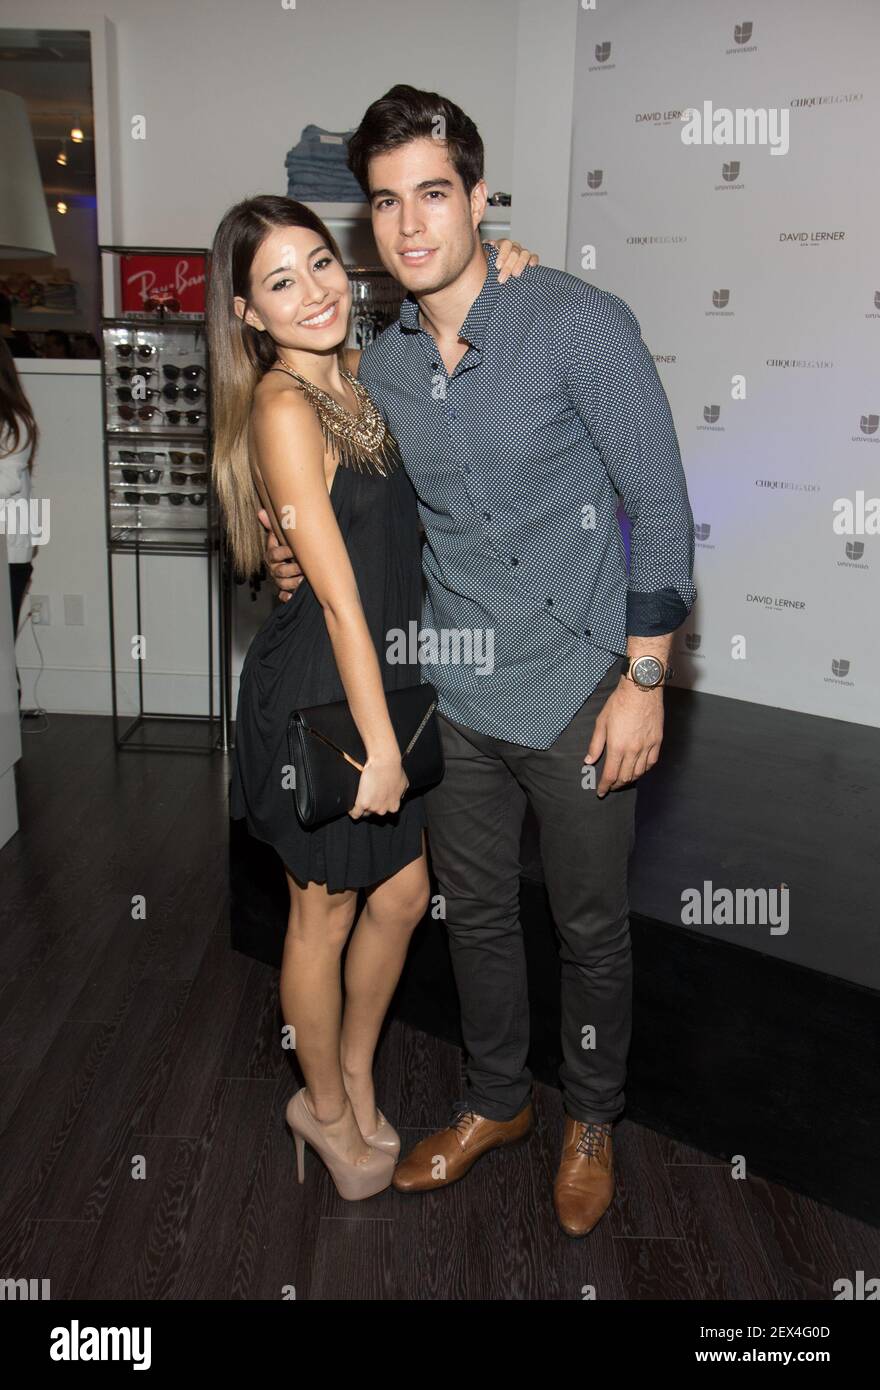 MIAMI, FL - MAY 07: Angela Rincon and Danilo Carrera are seen during the  launch of Chiqui Delgado collection for David Lerner NY on May 7, 2015 in  Miami, Fl. (Photo by